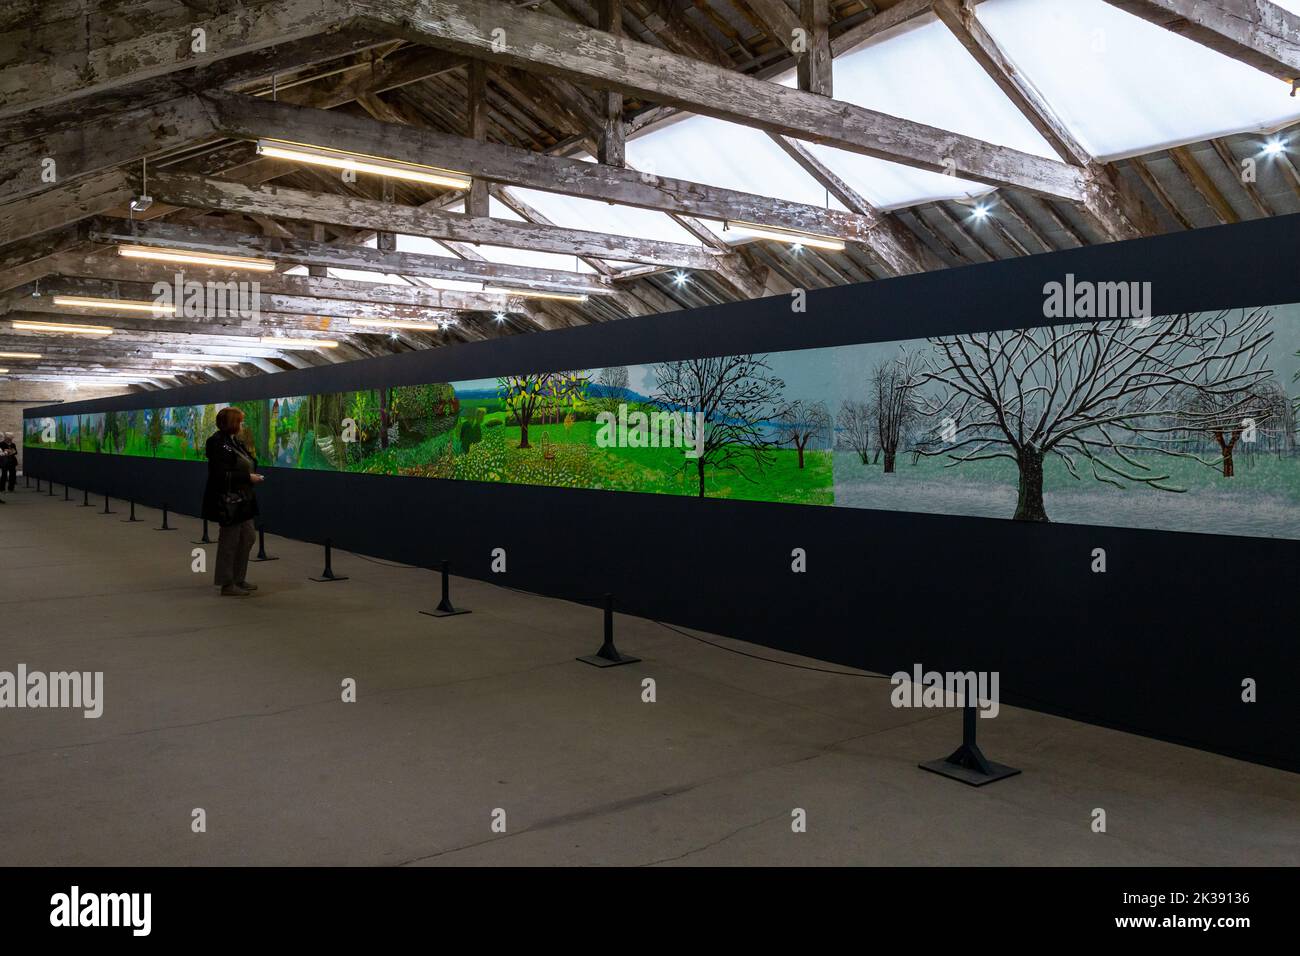 'Year in Normandie' painted by David Hockney. This 90m long frieze shows the seasons in Normandy and is exhibited in the roof space of Salts Mill. Stock Photo